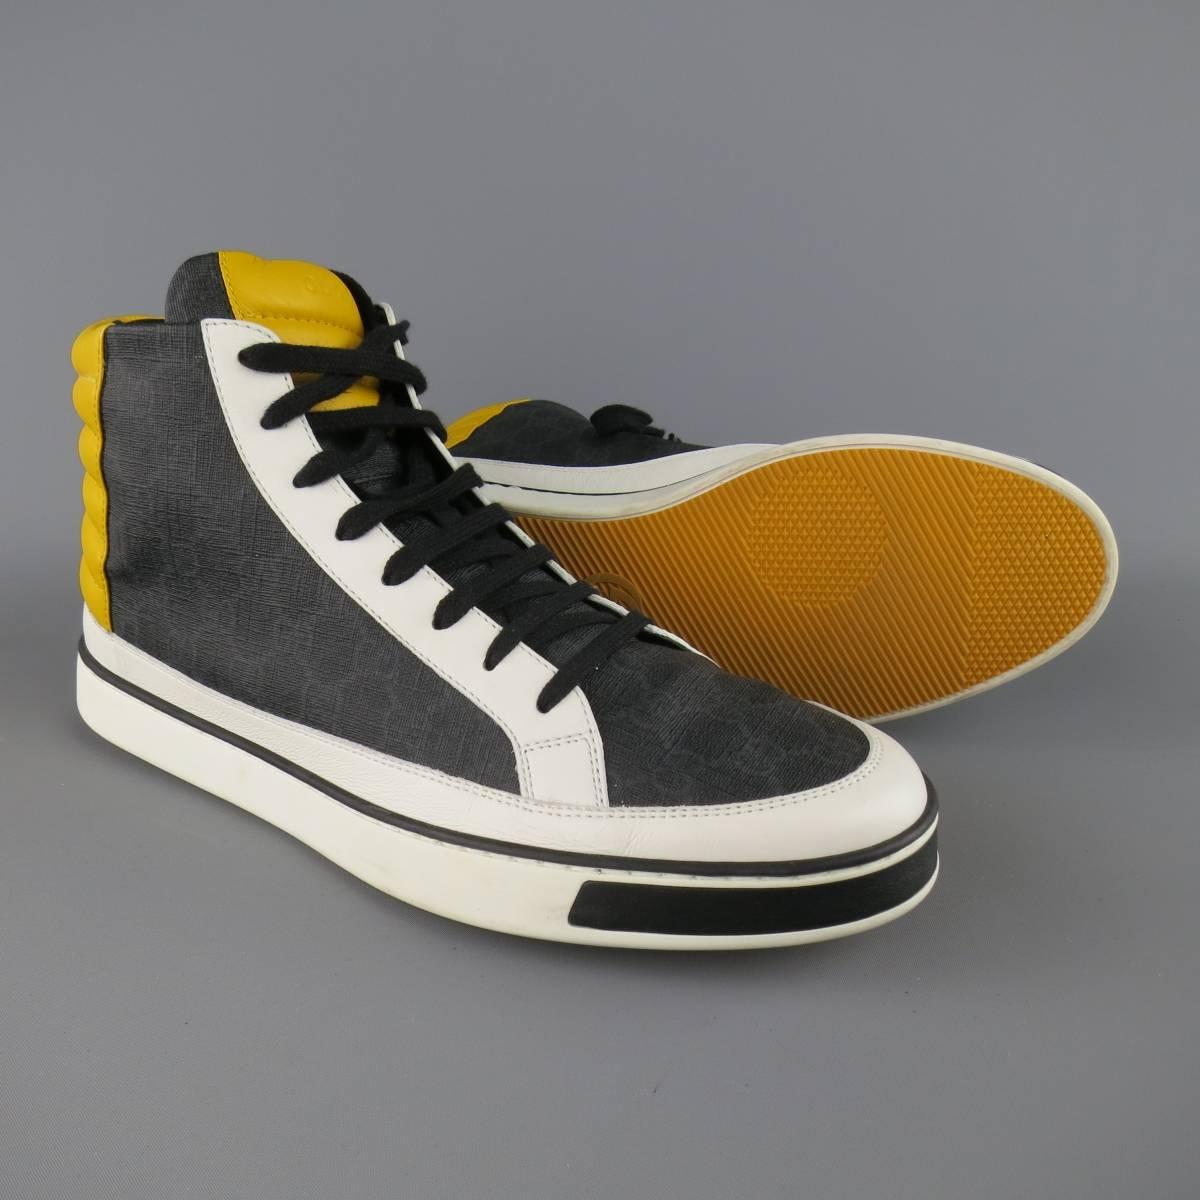 Limited Edition GUCCI high top sneakers come in a navy and charcoal monogram fabric with white leather trim, yellow leather padding and rubber sole. Minor Wear. Made in Italy.
 
Good Pre-Owned Condition.
Marked: UK 12.5
 
Outsole: 12.5 X 4.5